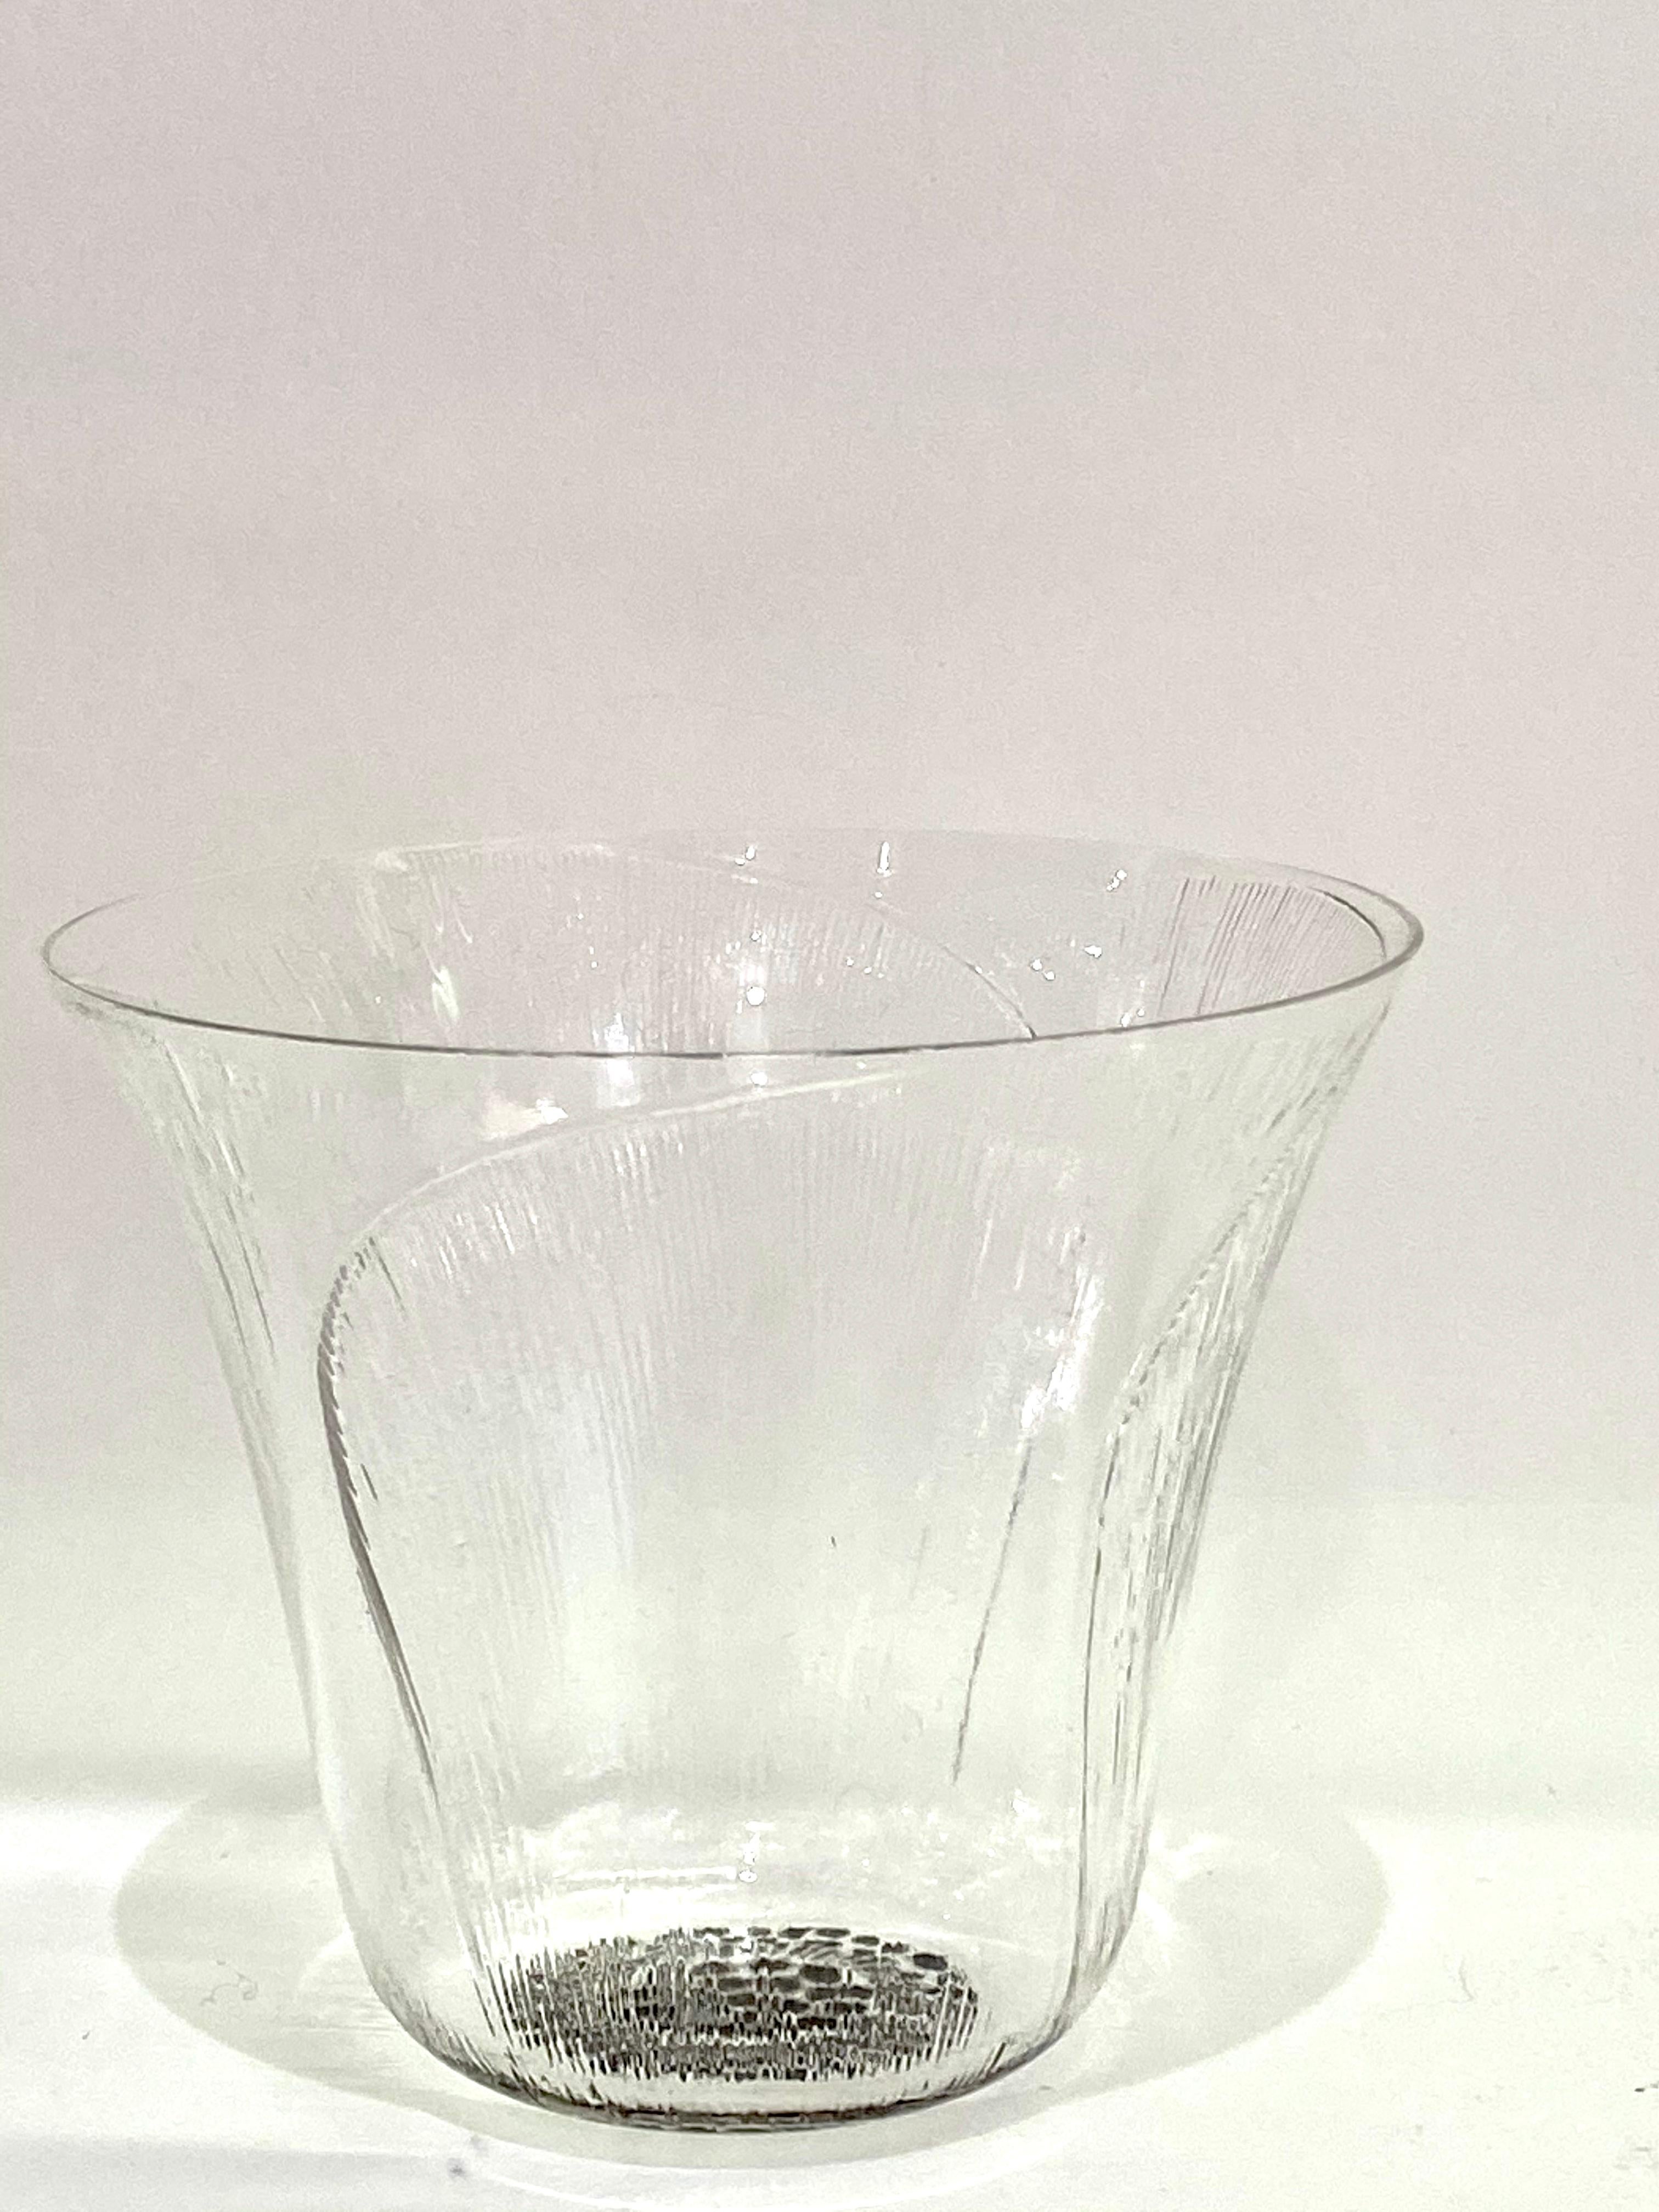 Set of 12 (twelve) drinking glasses cups made by René Lalique in 1922. Model is named 